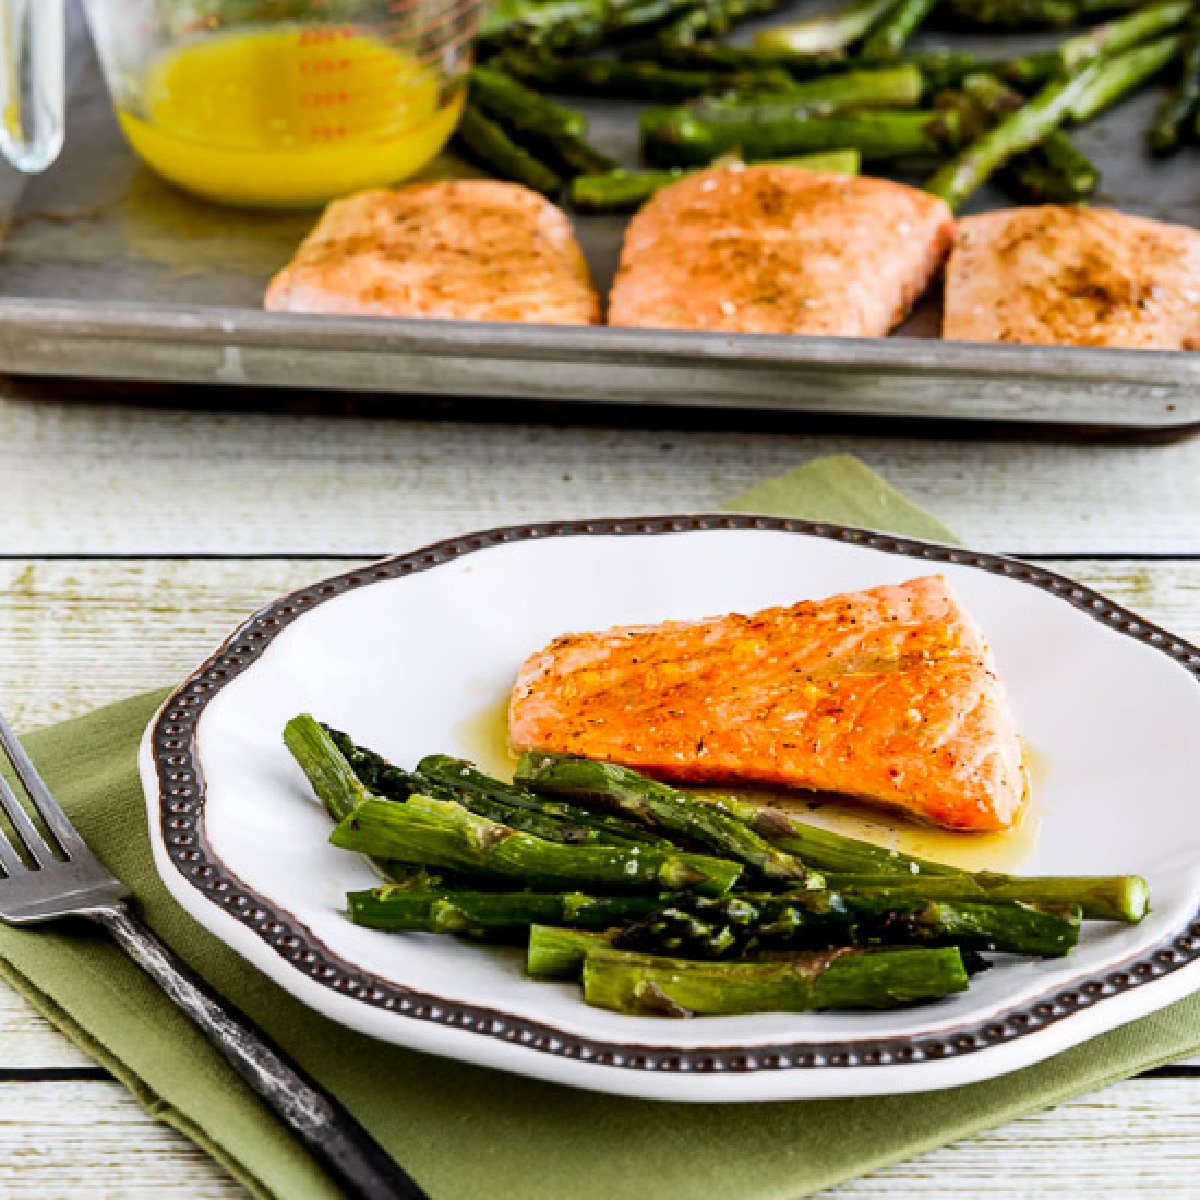 square image for Roasted Lemon Salmon and Asparagus Sheet Pan Meal shown on plate with sheet pan in background.